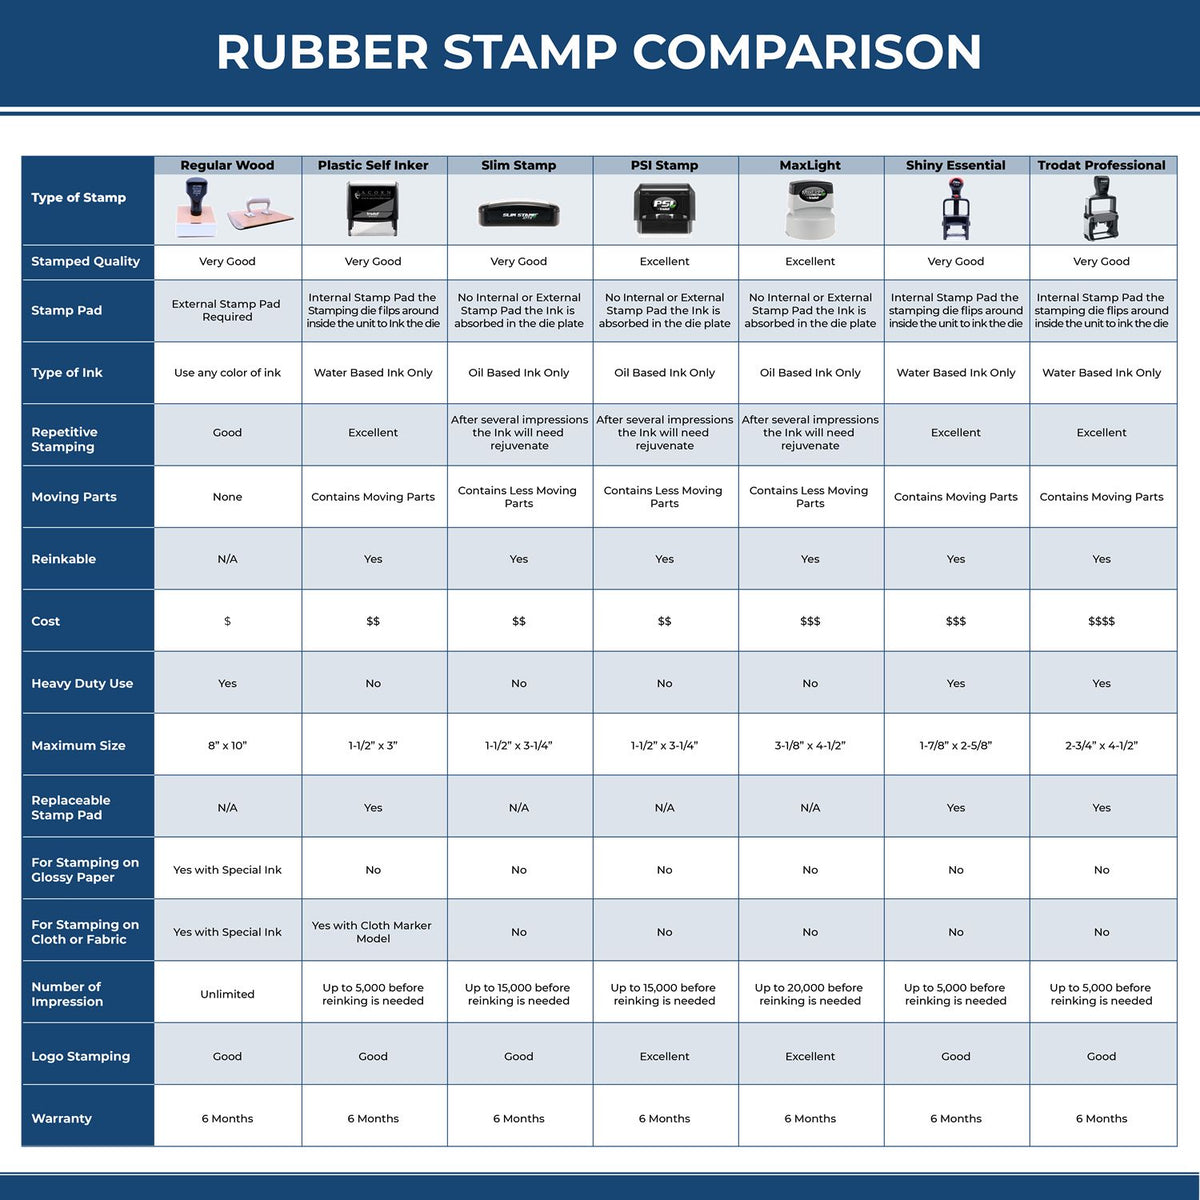 Public Weighmaster Slim Pre-Inked Rubber Stamp of Seal 3007WE Rubber Stamp Comparison